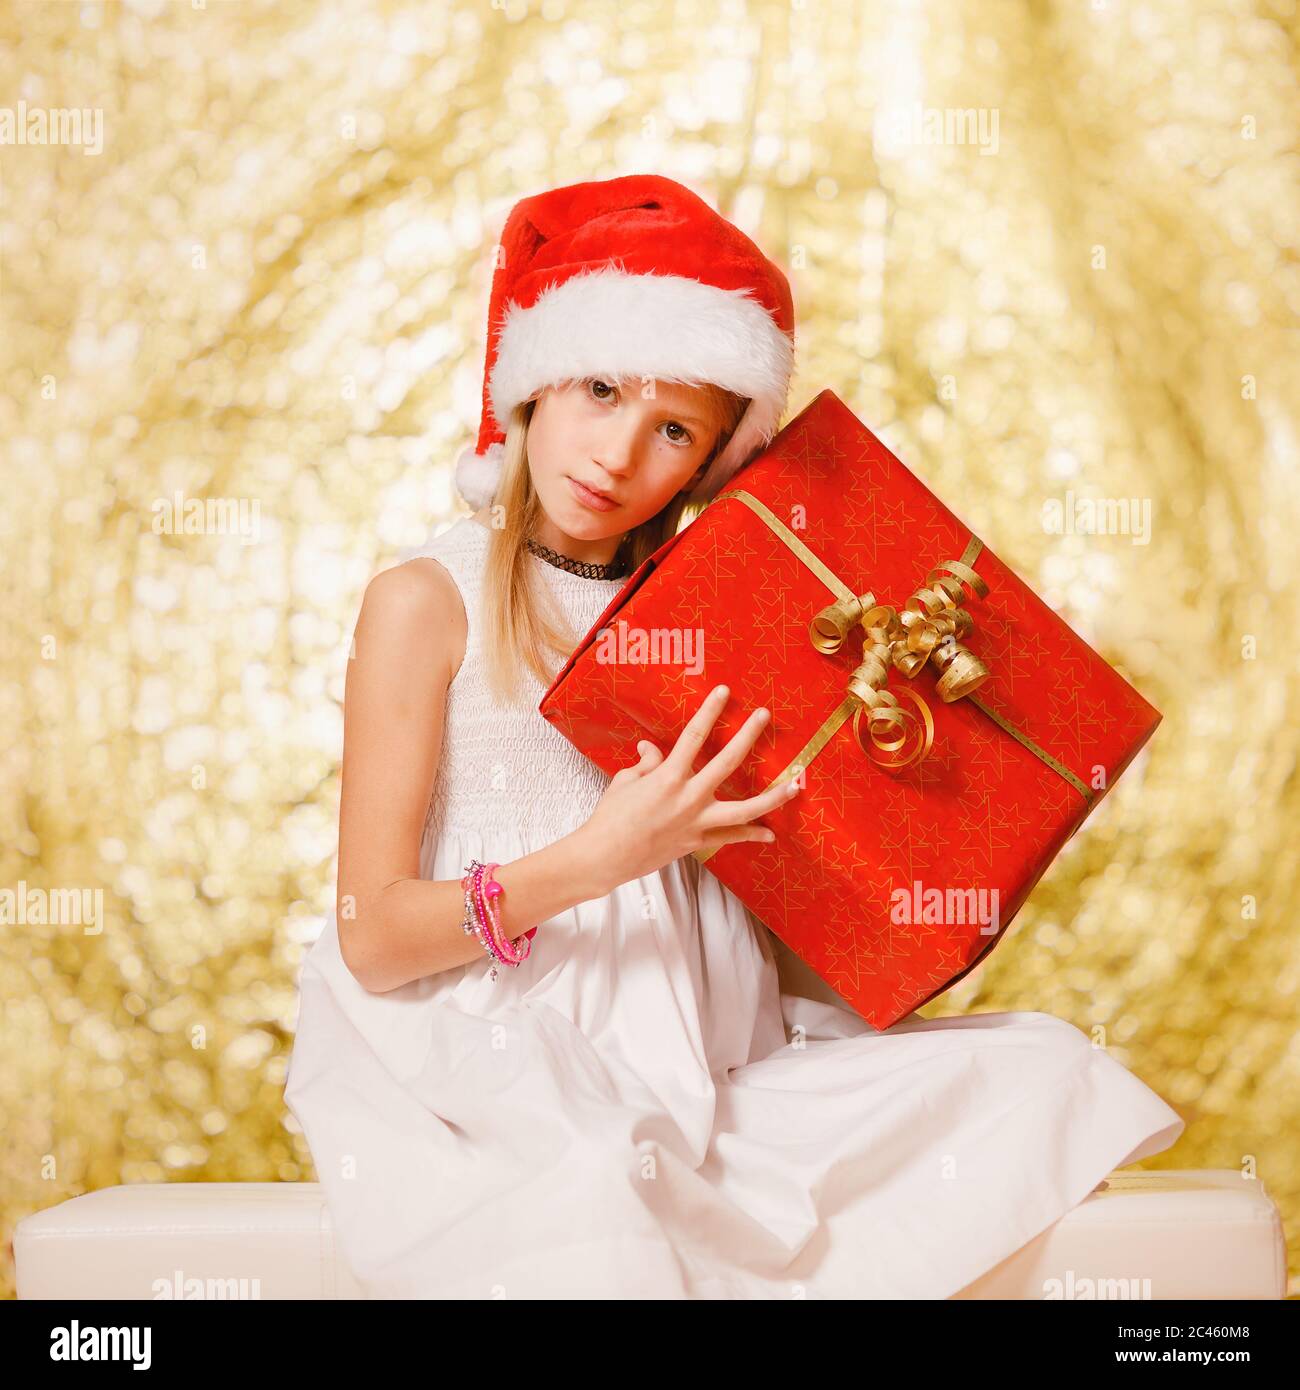 Young girl, primary school age, holding Christmas gift, wearing Christmas hat in front of festive Ch Stock Photo